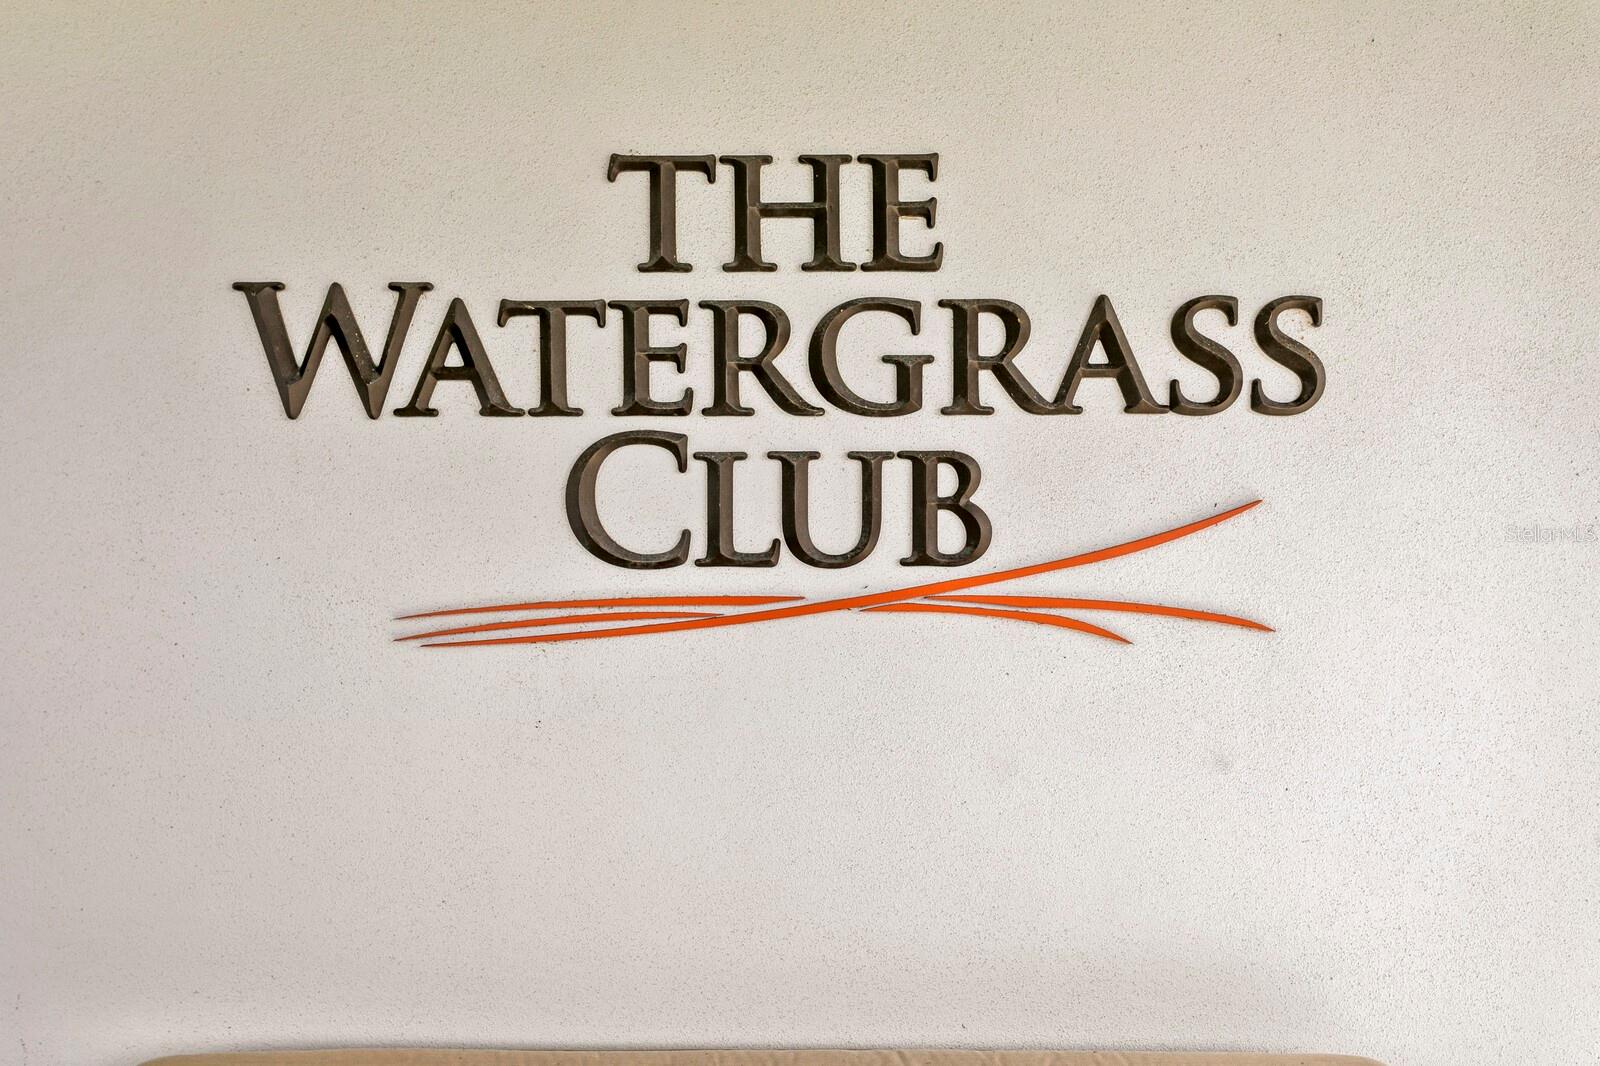 The Watergrass Club is our premiere amenity center.